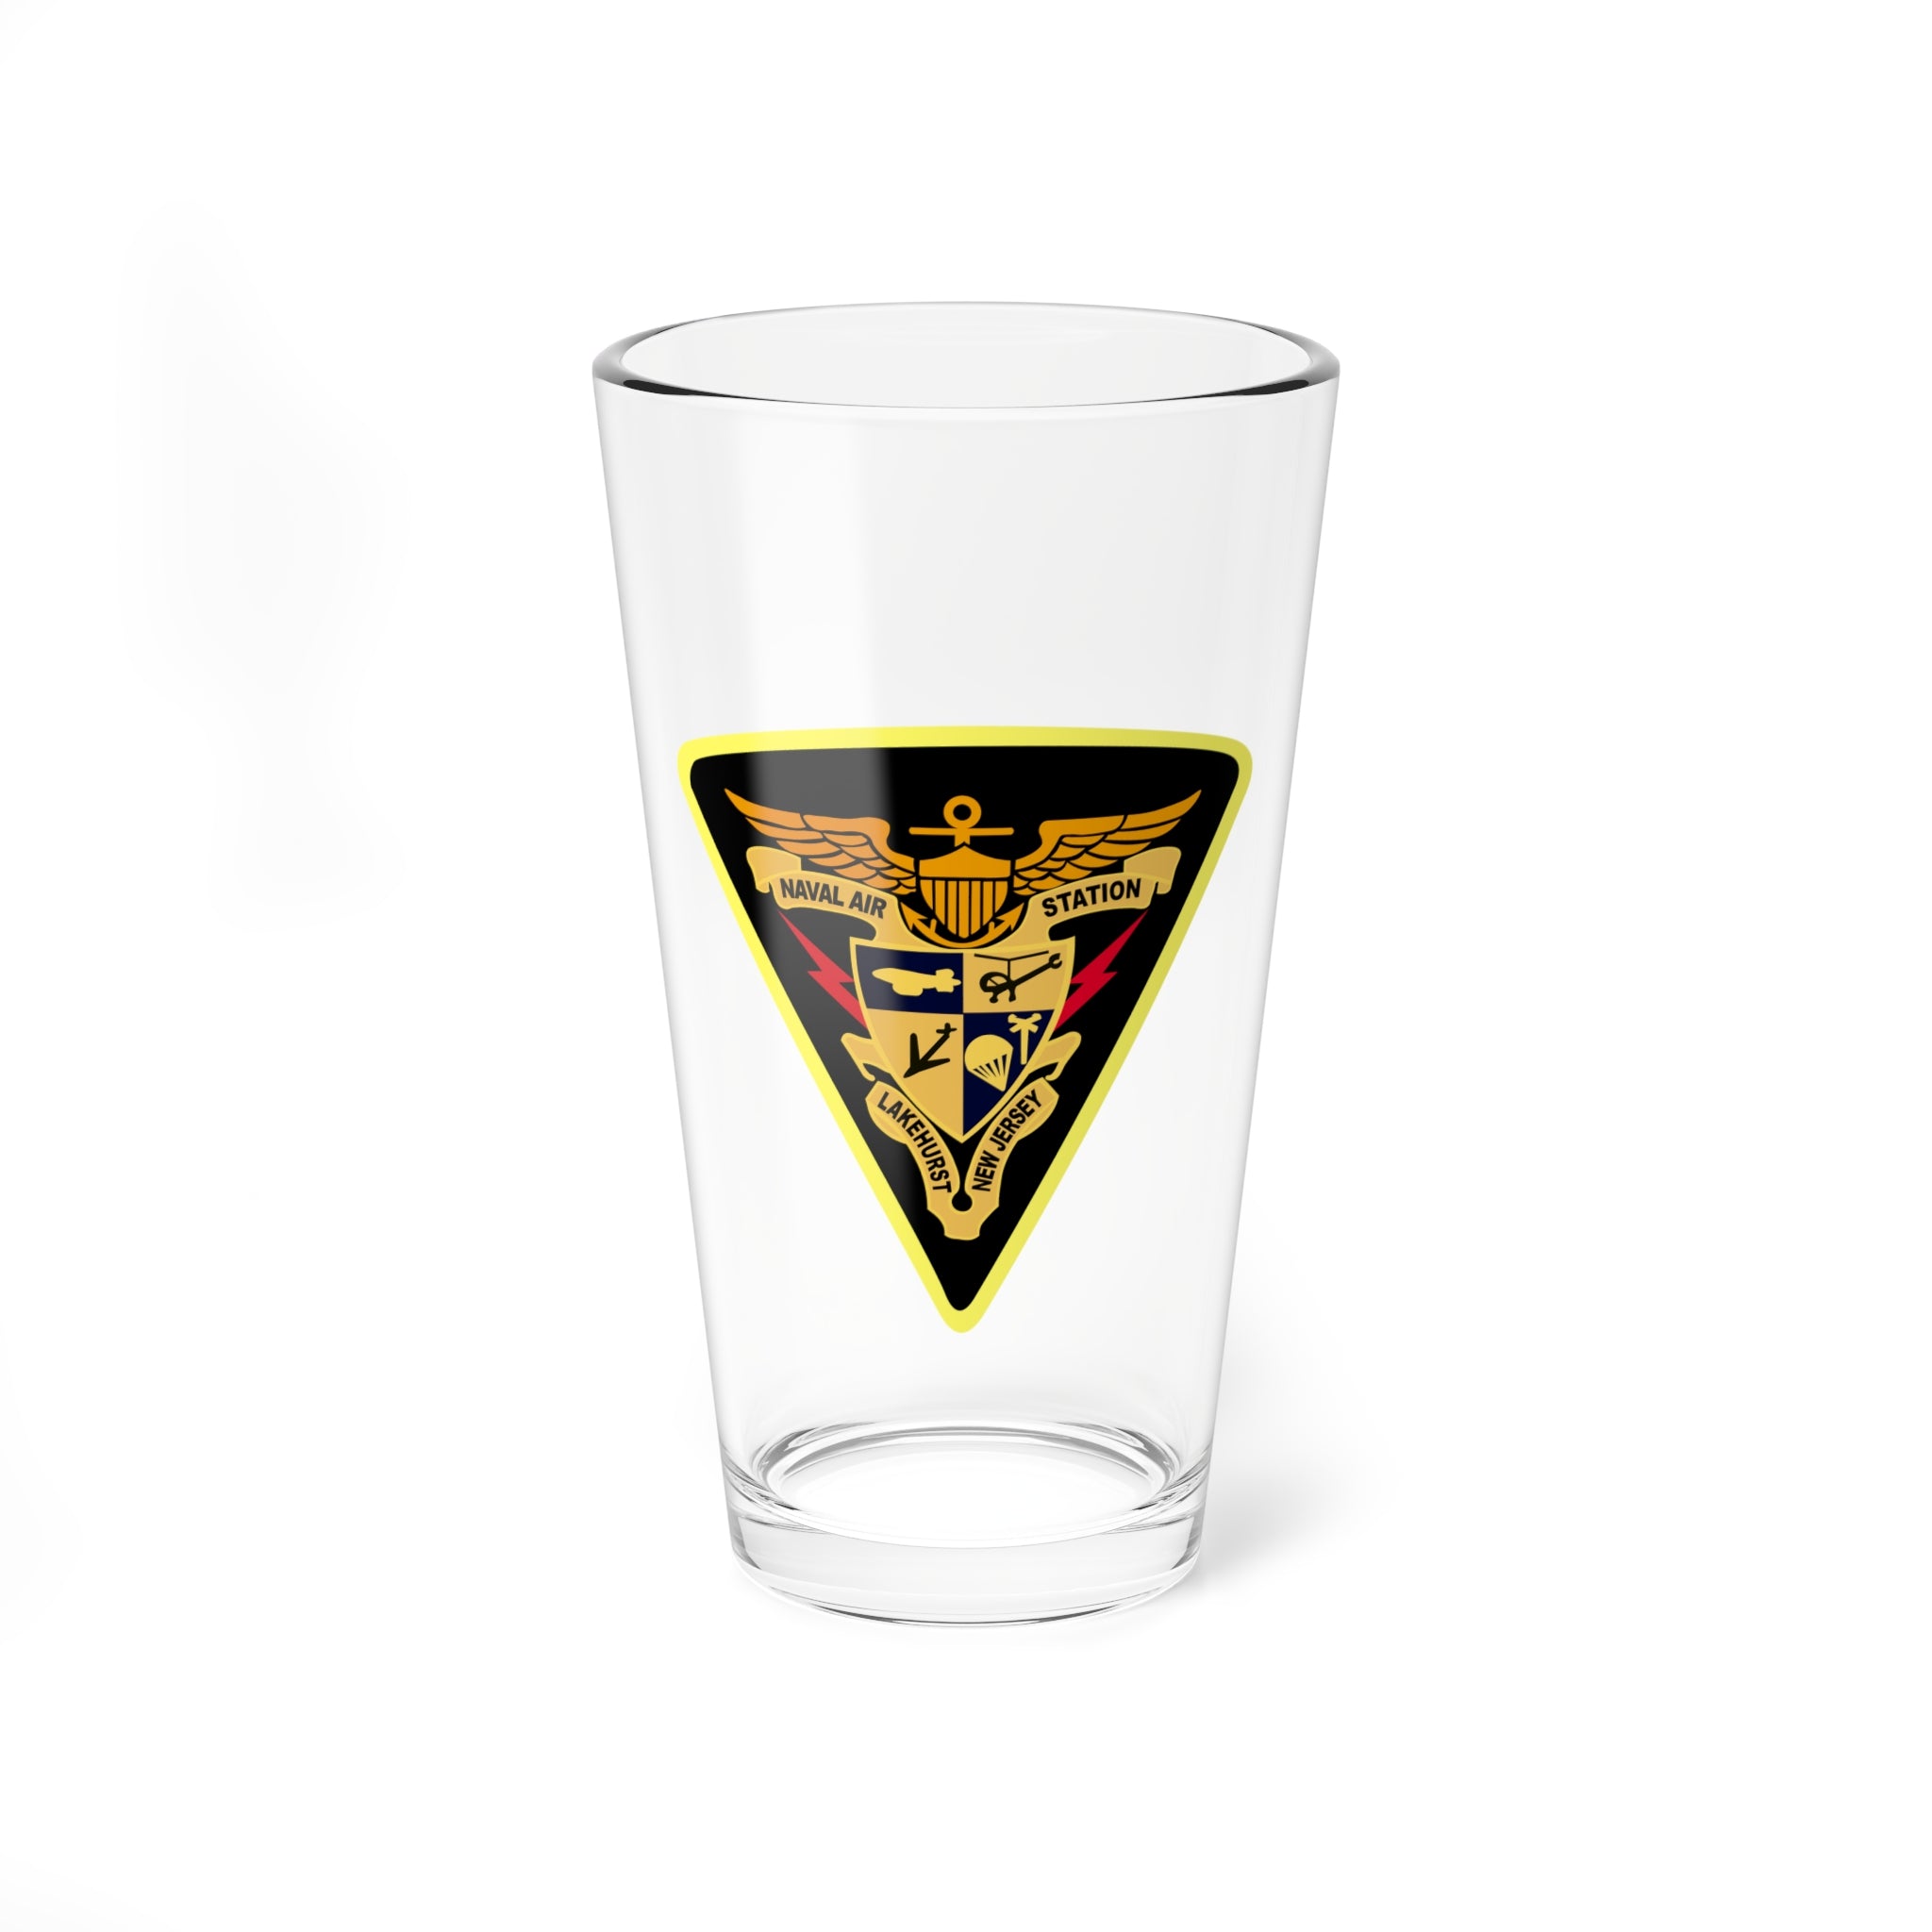 Naval Air Station Lakehurst Pint Glass, Surface Navy Destroyer squadron staff for our disassociated aviators